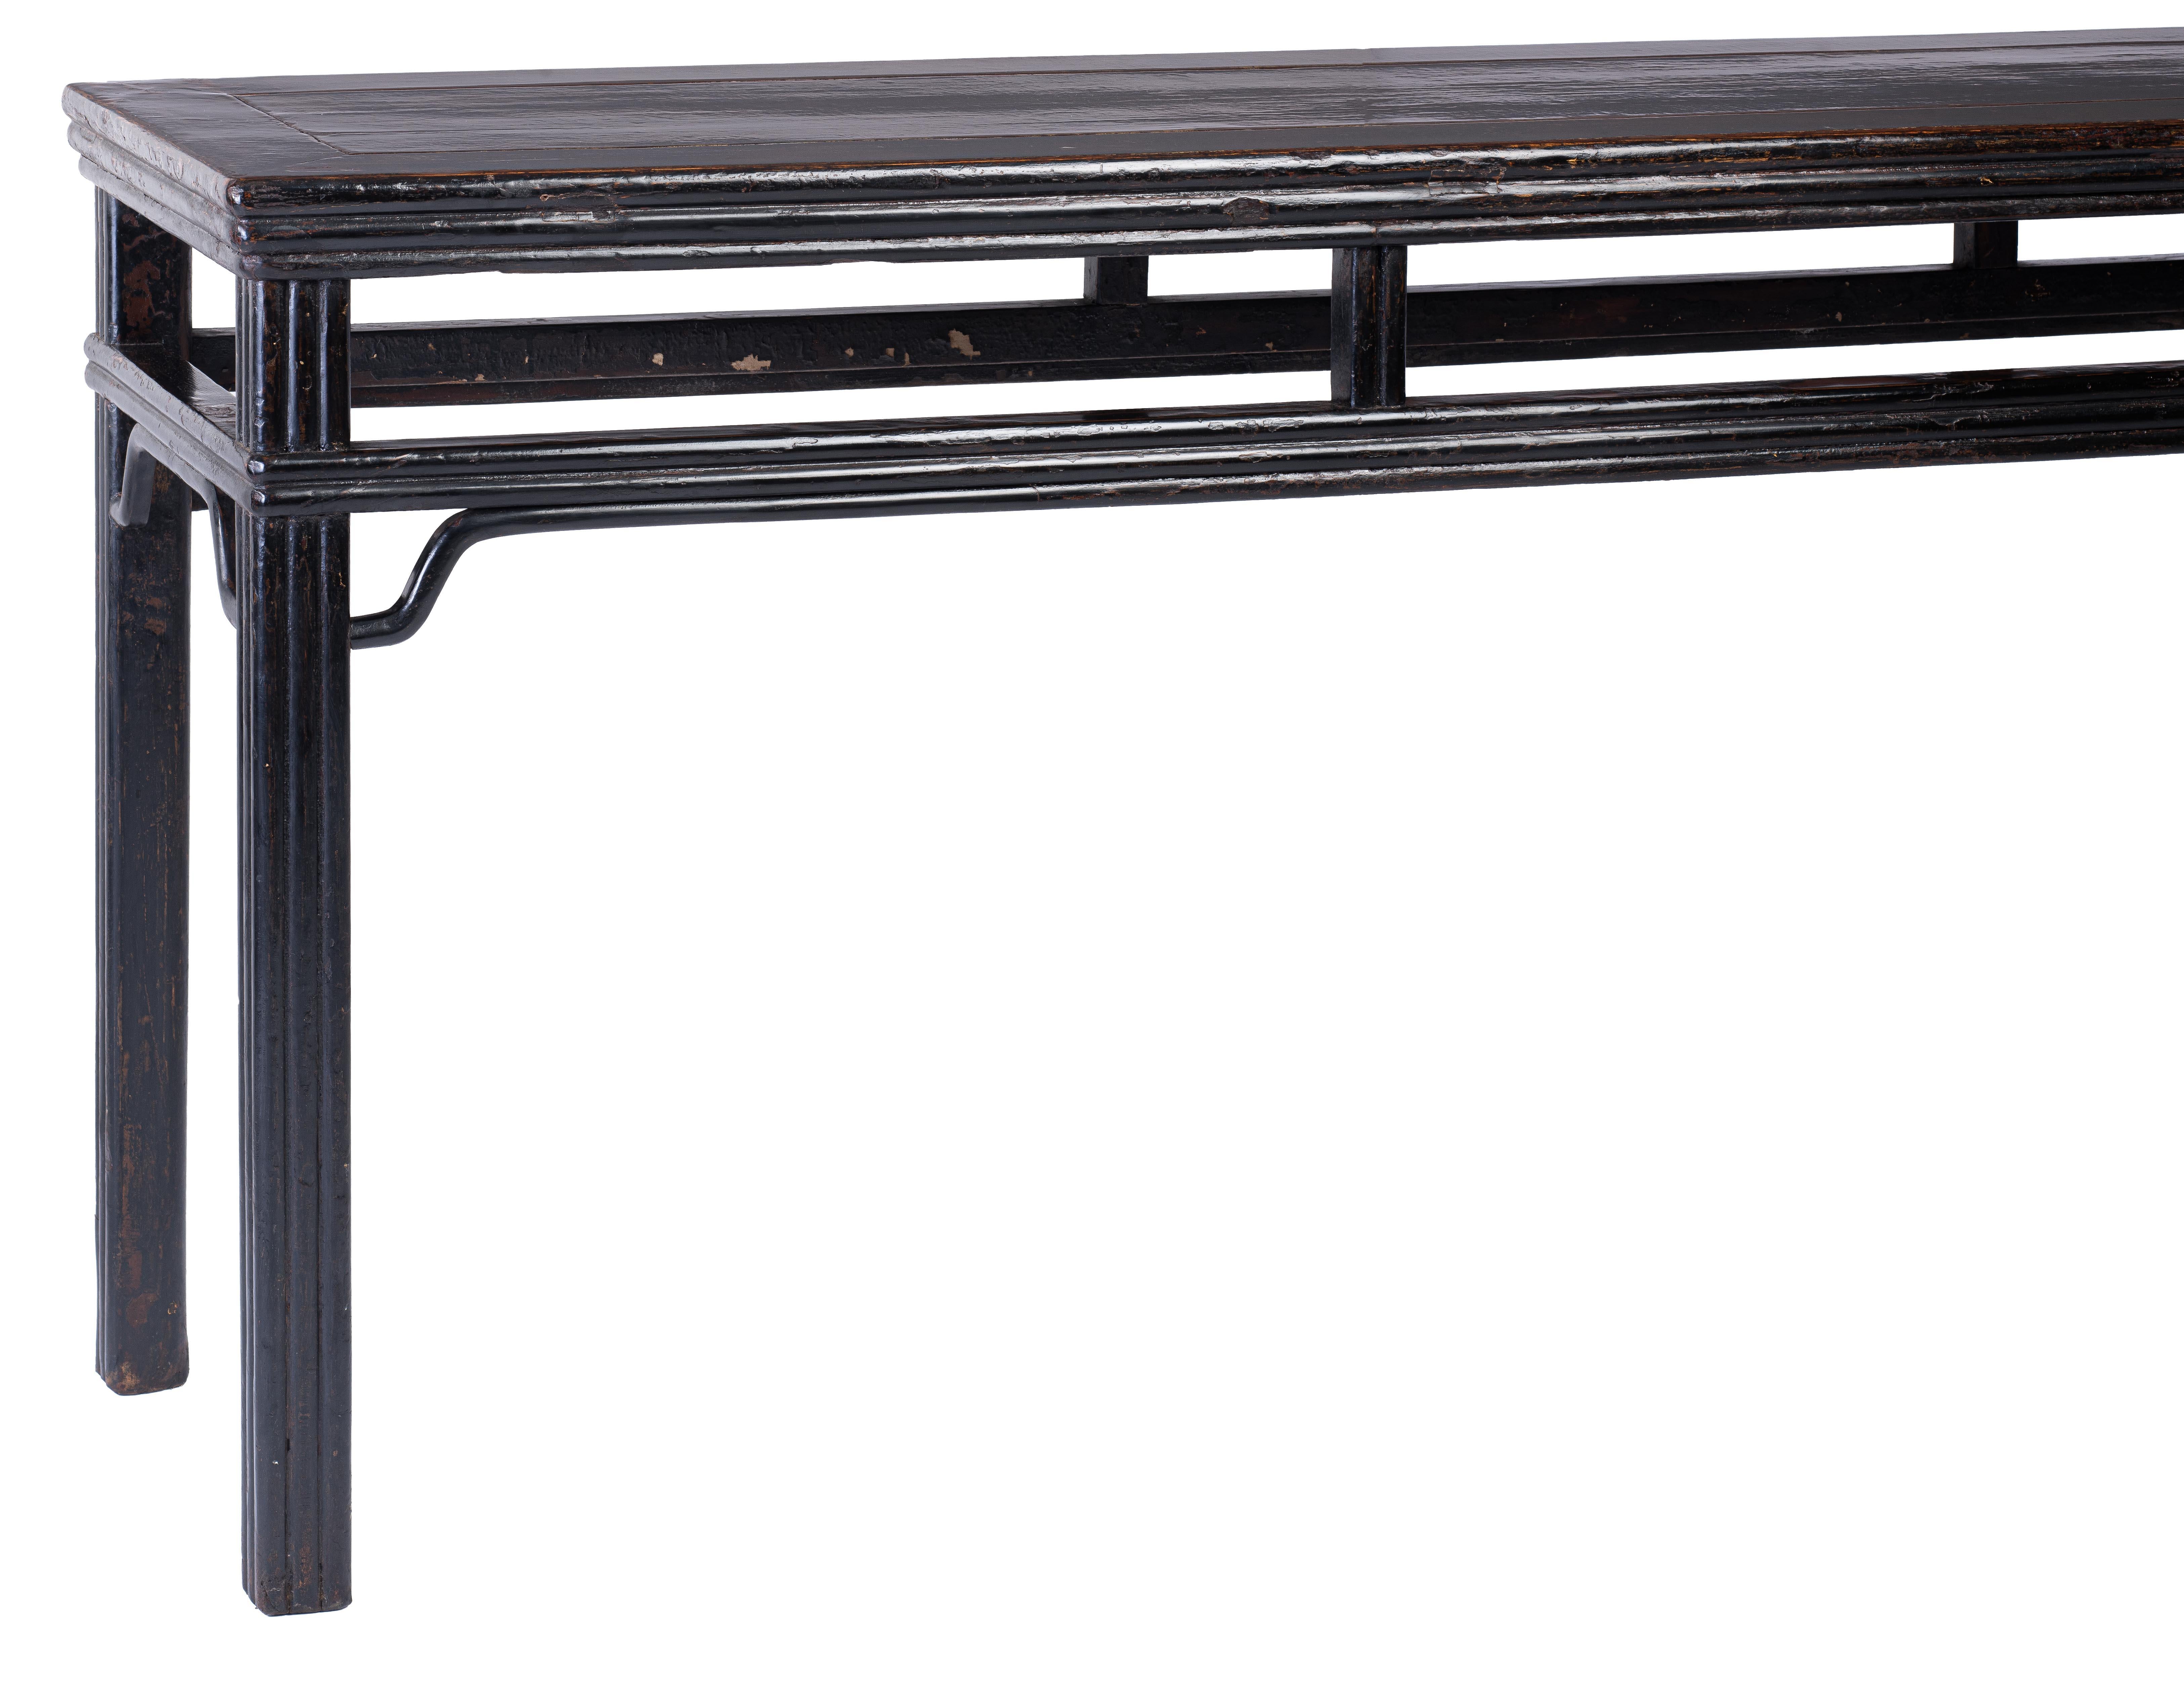 Fine Table

The table with carved lipped molding, topped with a floating panel within a frame, supported on corner legs with wrapped-around humpback stretchers, attached wrapped-around humpback spandrels and vertical struts

Black Lacquer over